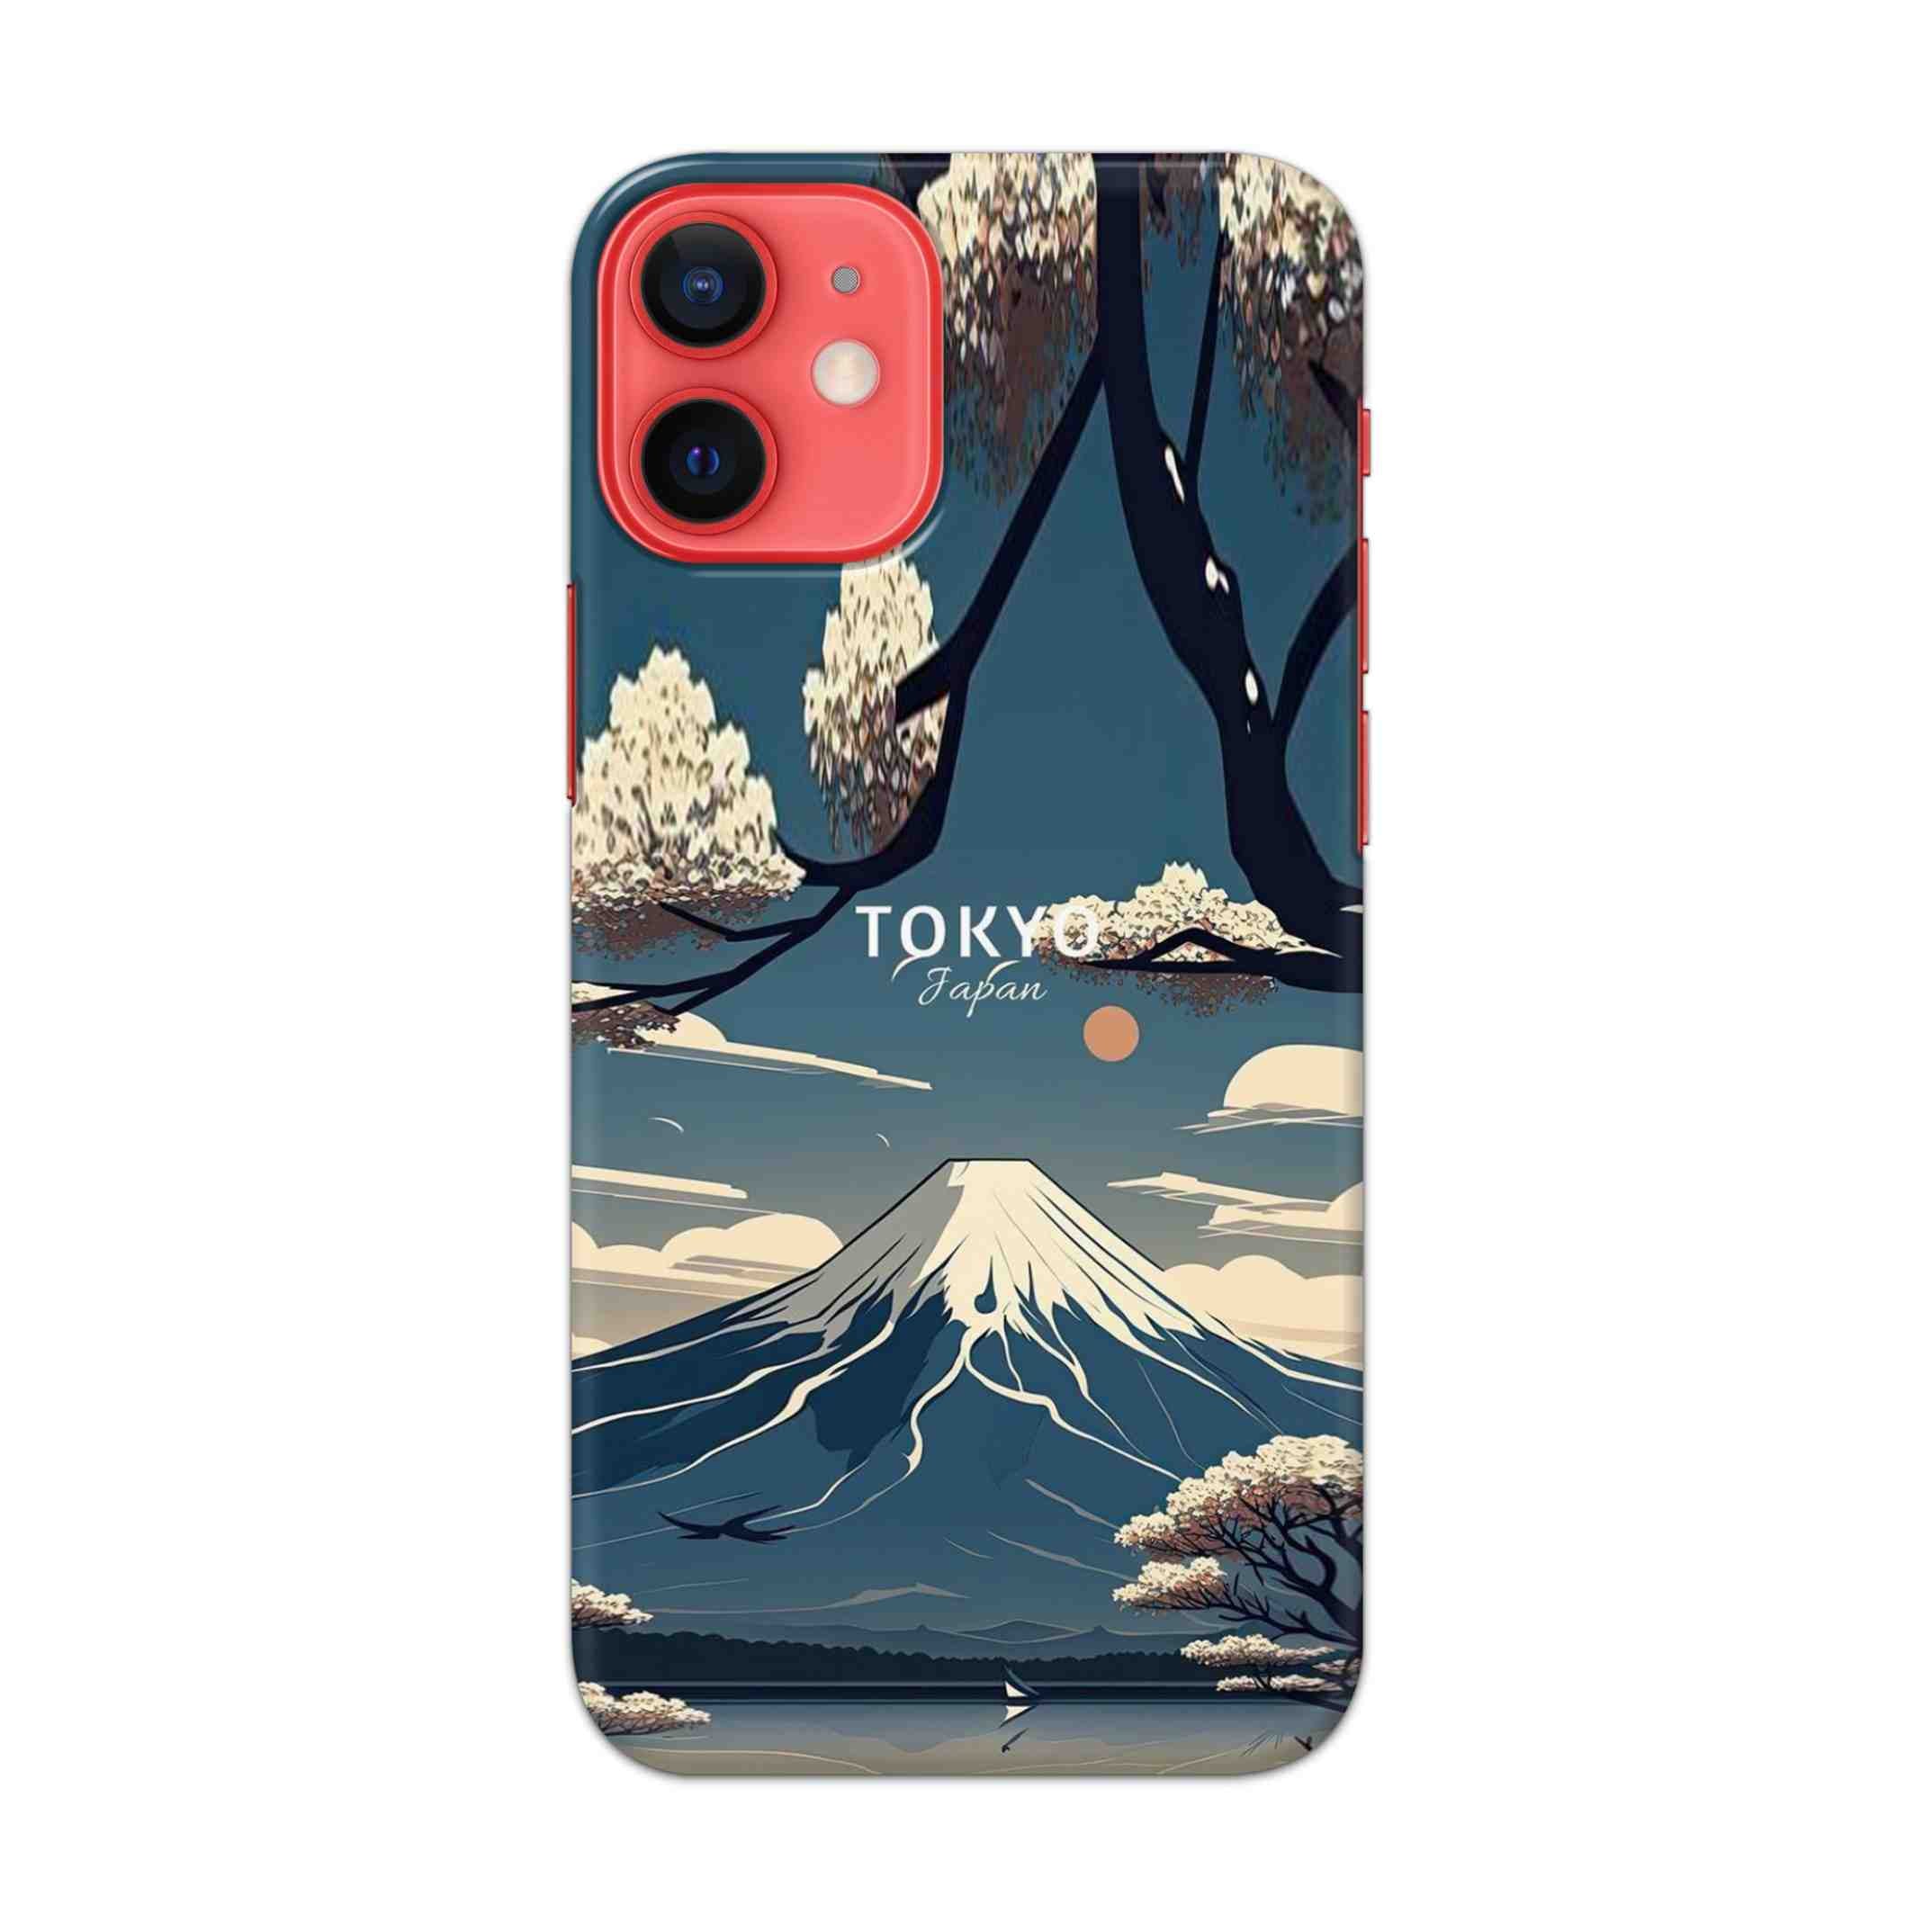 Buy Tokyo Hard Back Mobile Phone Case/Cover For Apple iPhone 12 mini Online